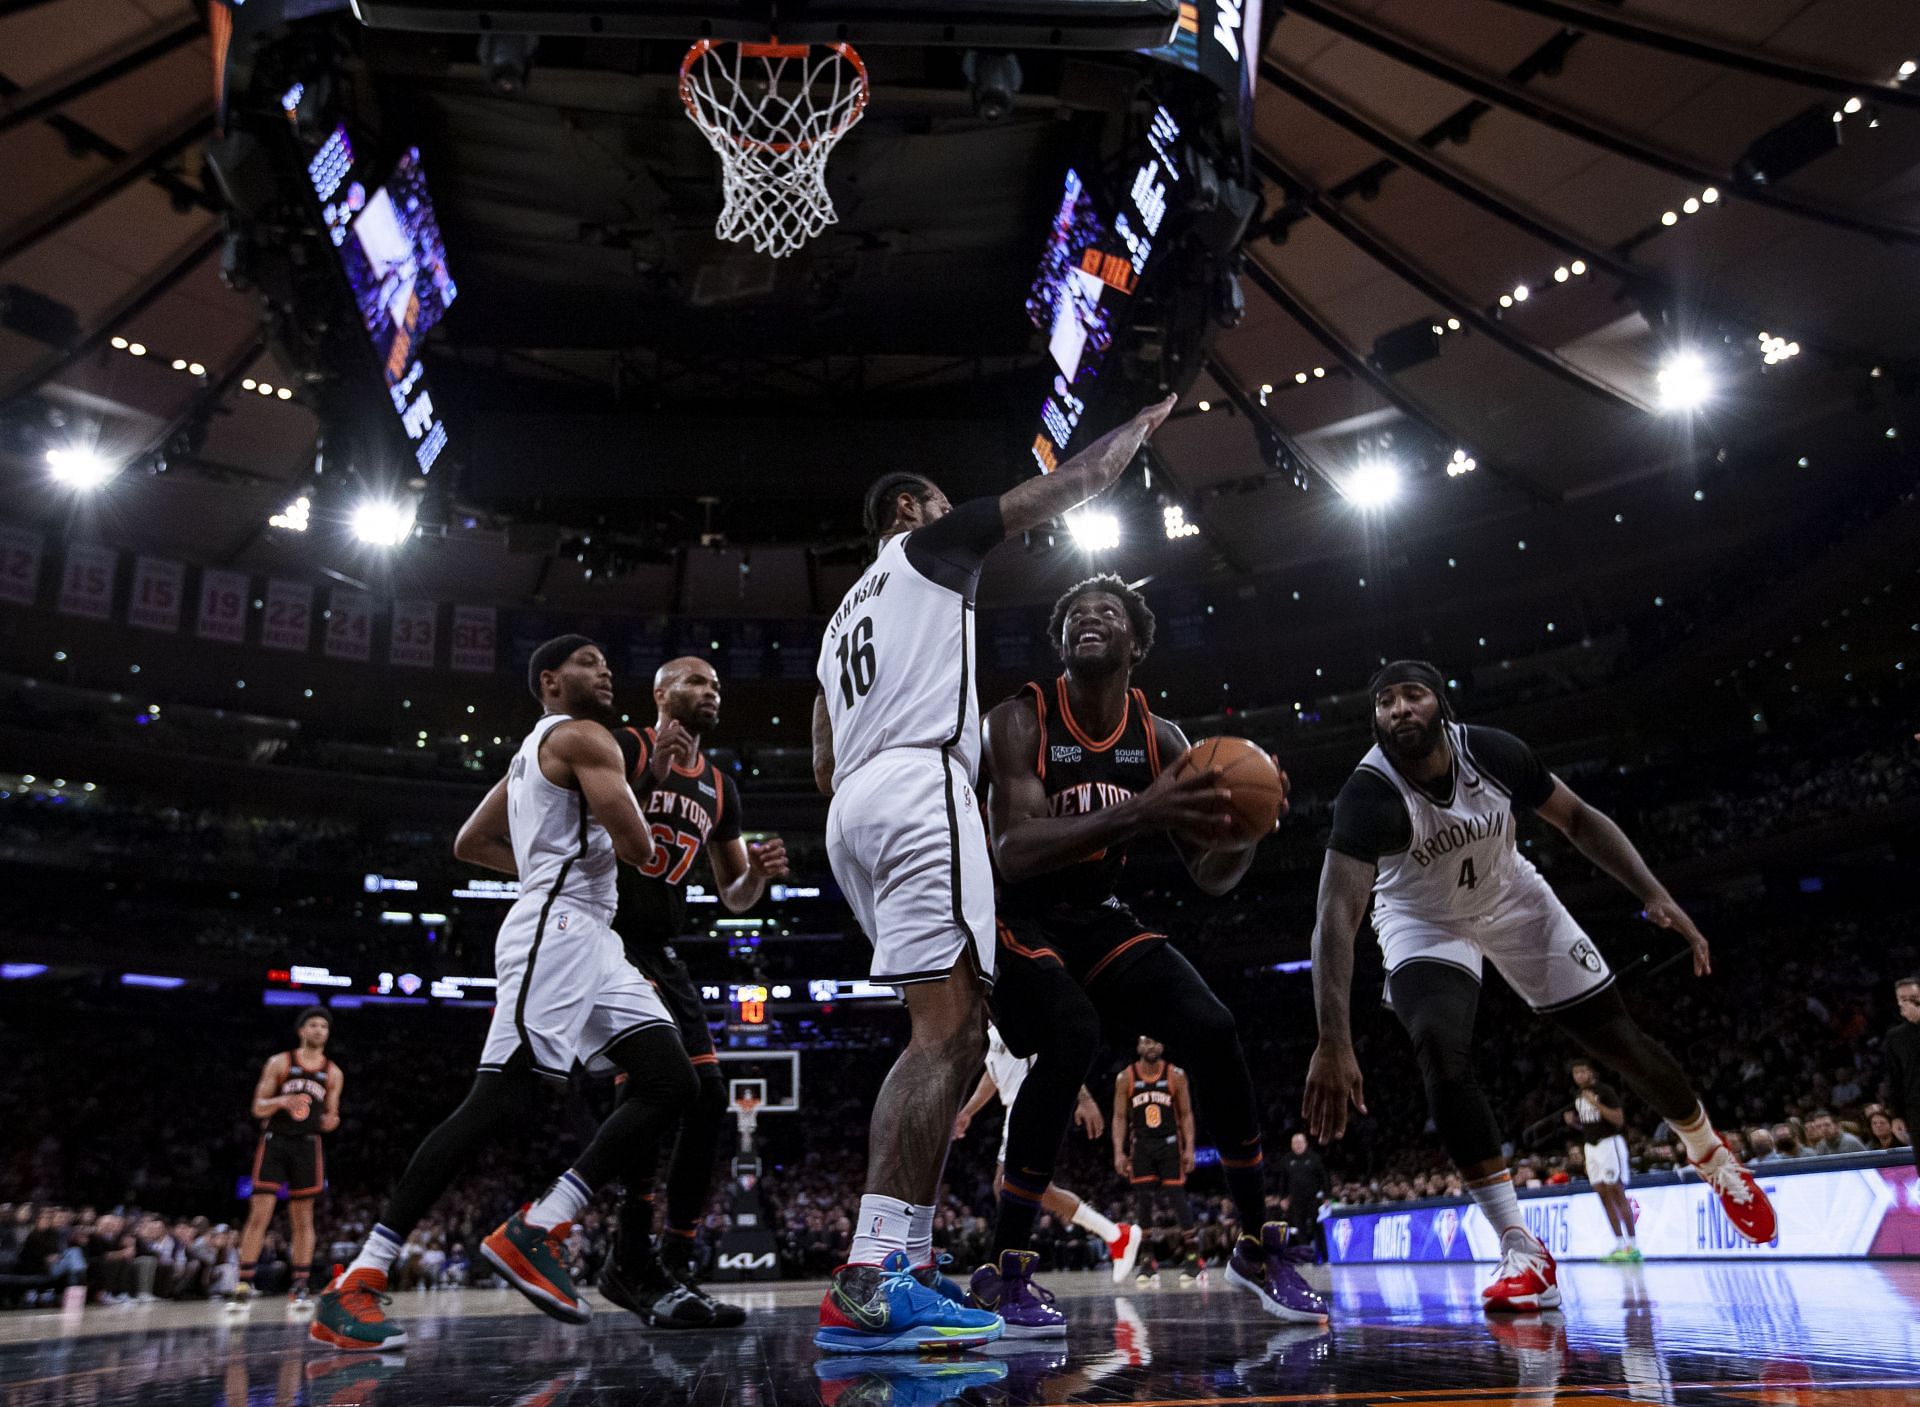 A snap from the match between the Brooklyn Nets and the New York Knicks.